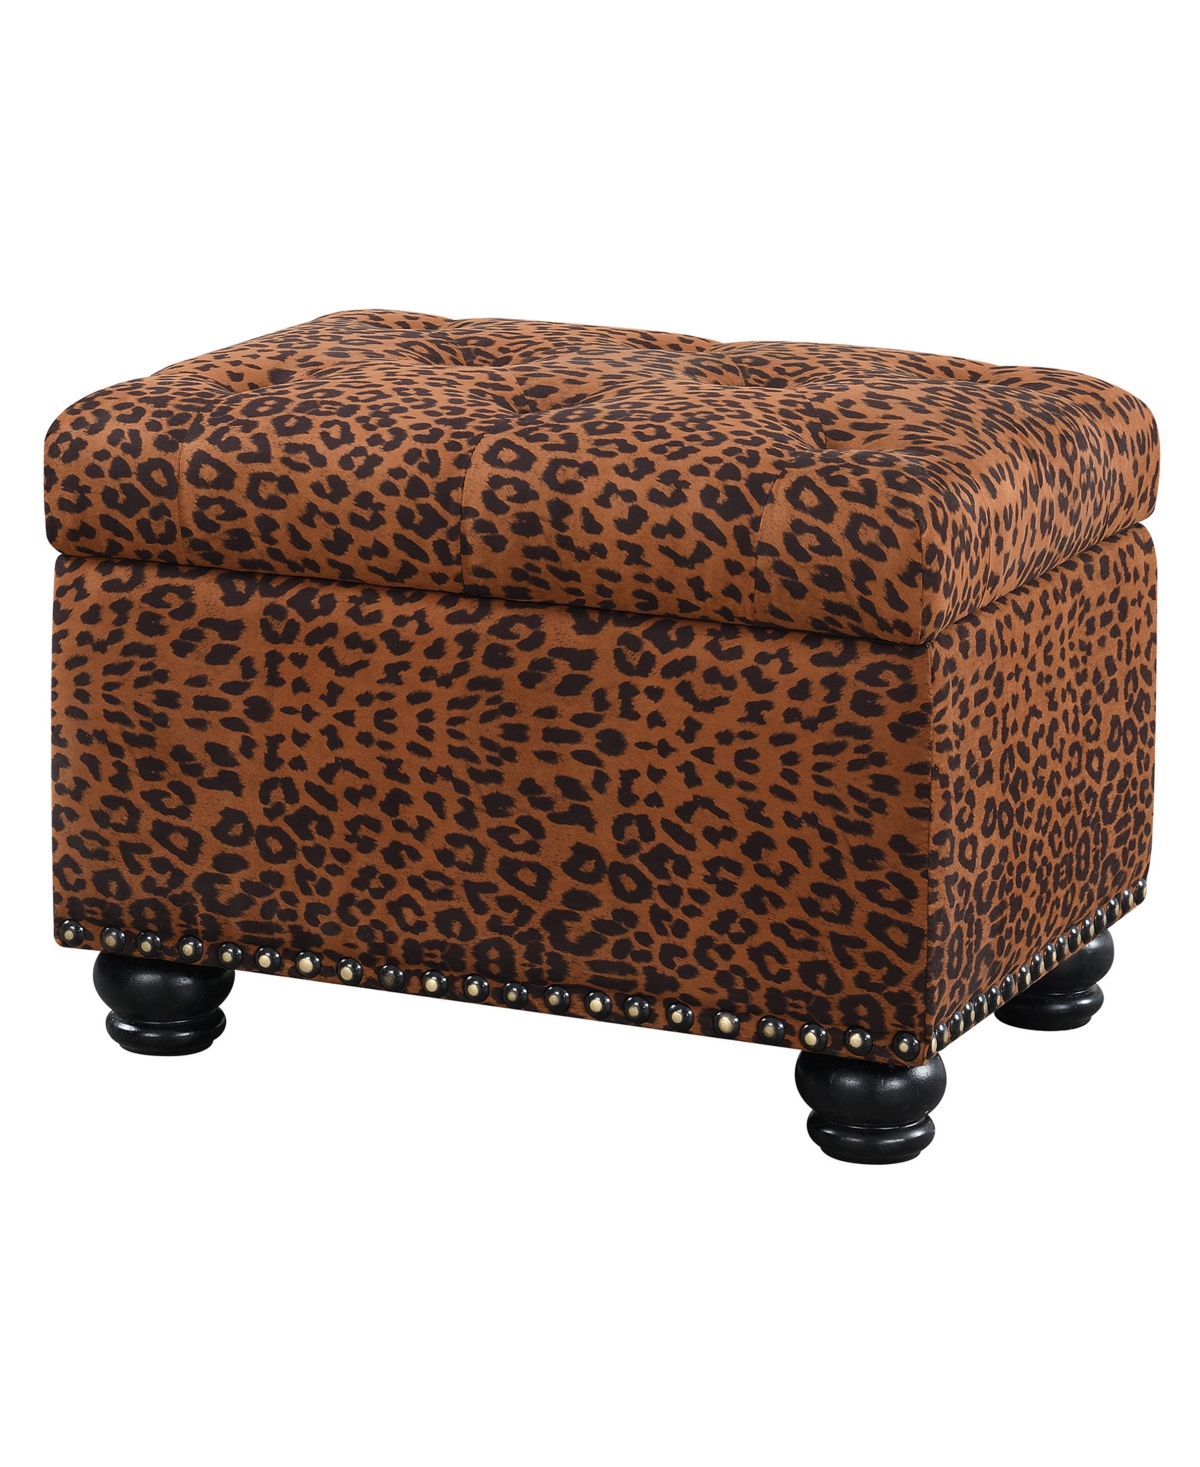 Convenience Concepts 24" Printed Fabric 5th Avenue Storage Ottoman In Forest Leopard Print Fabric